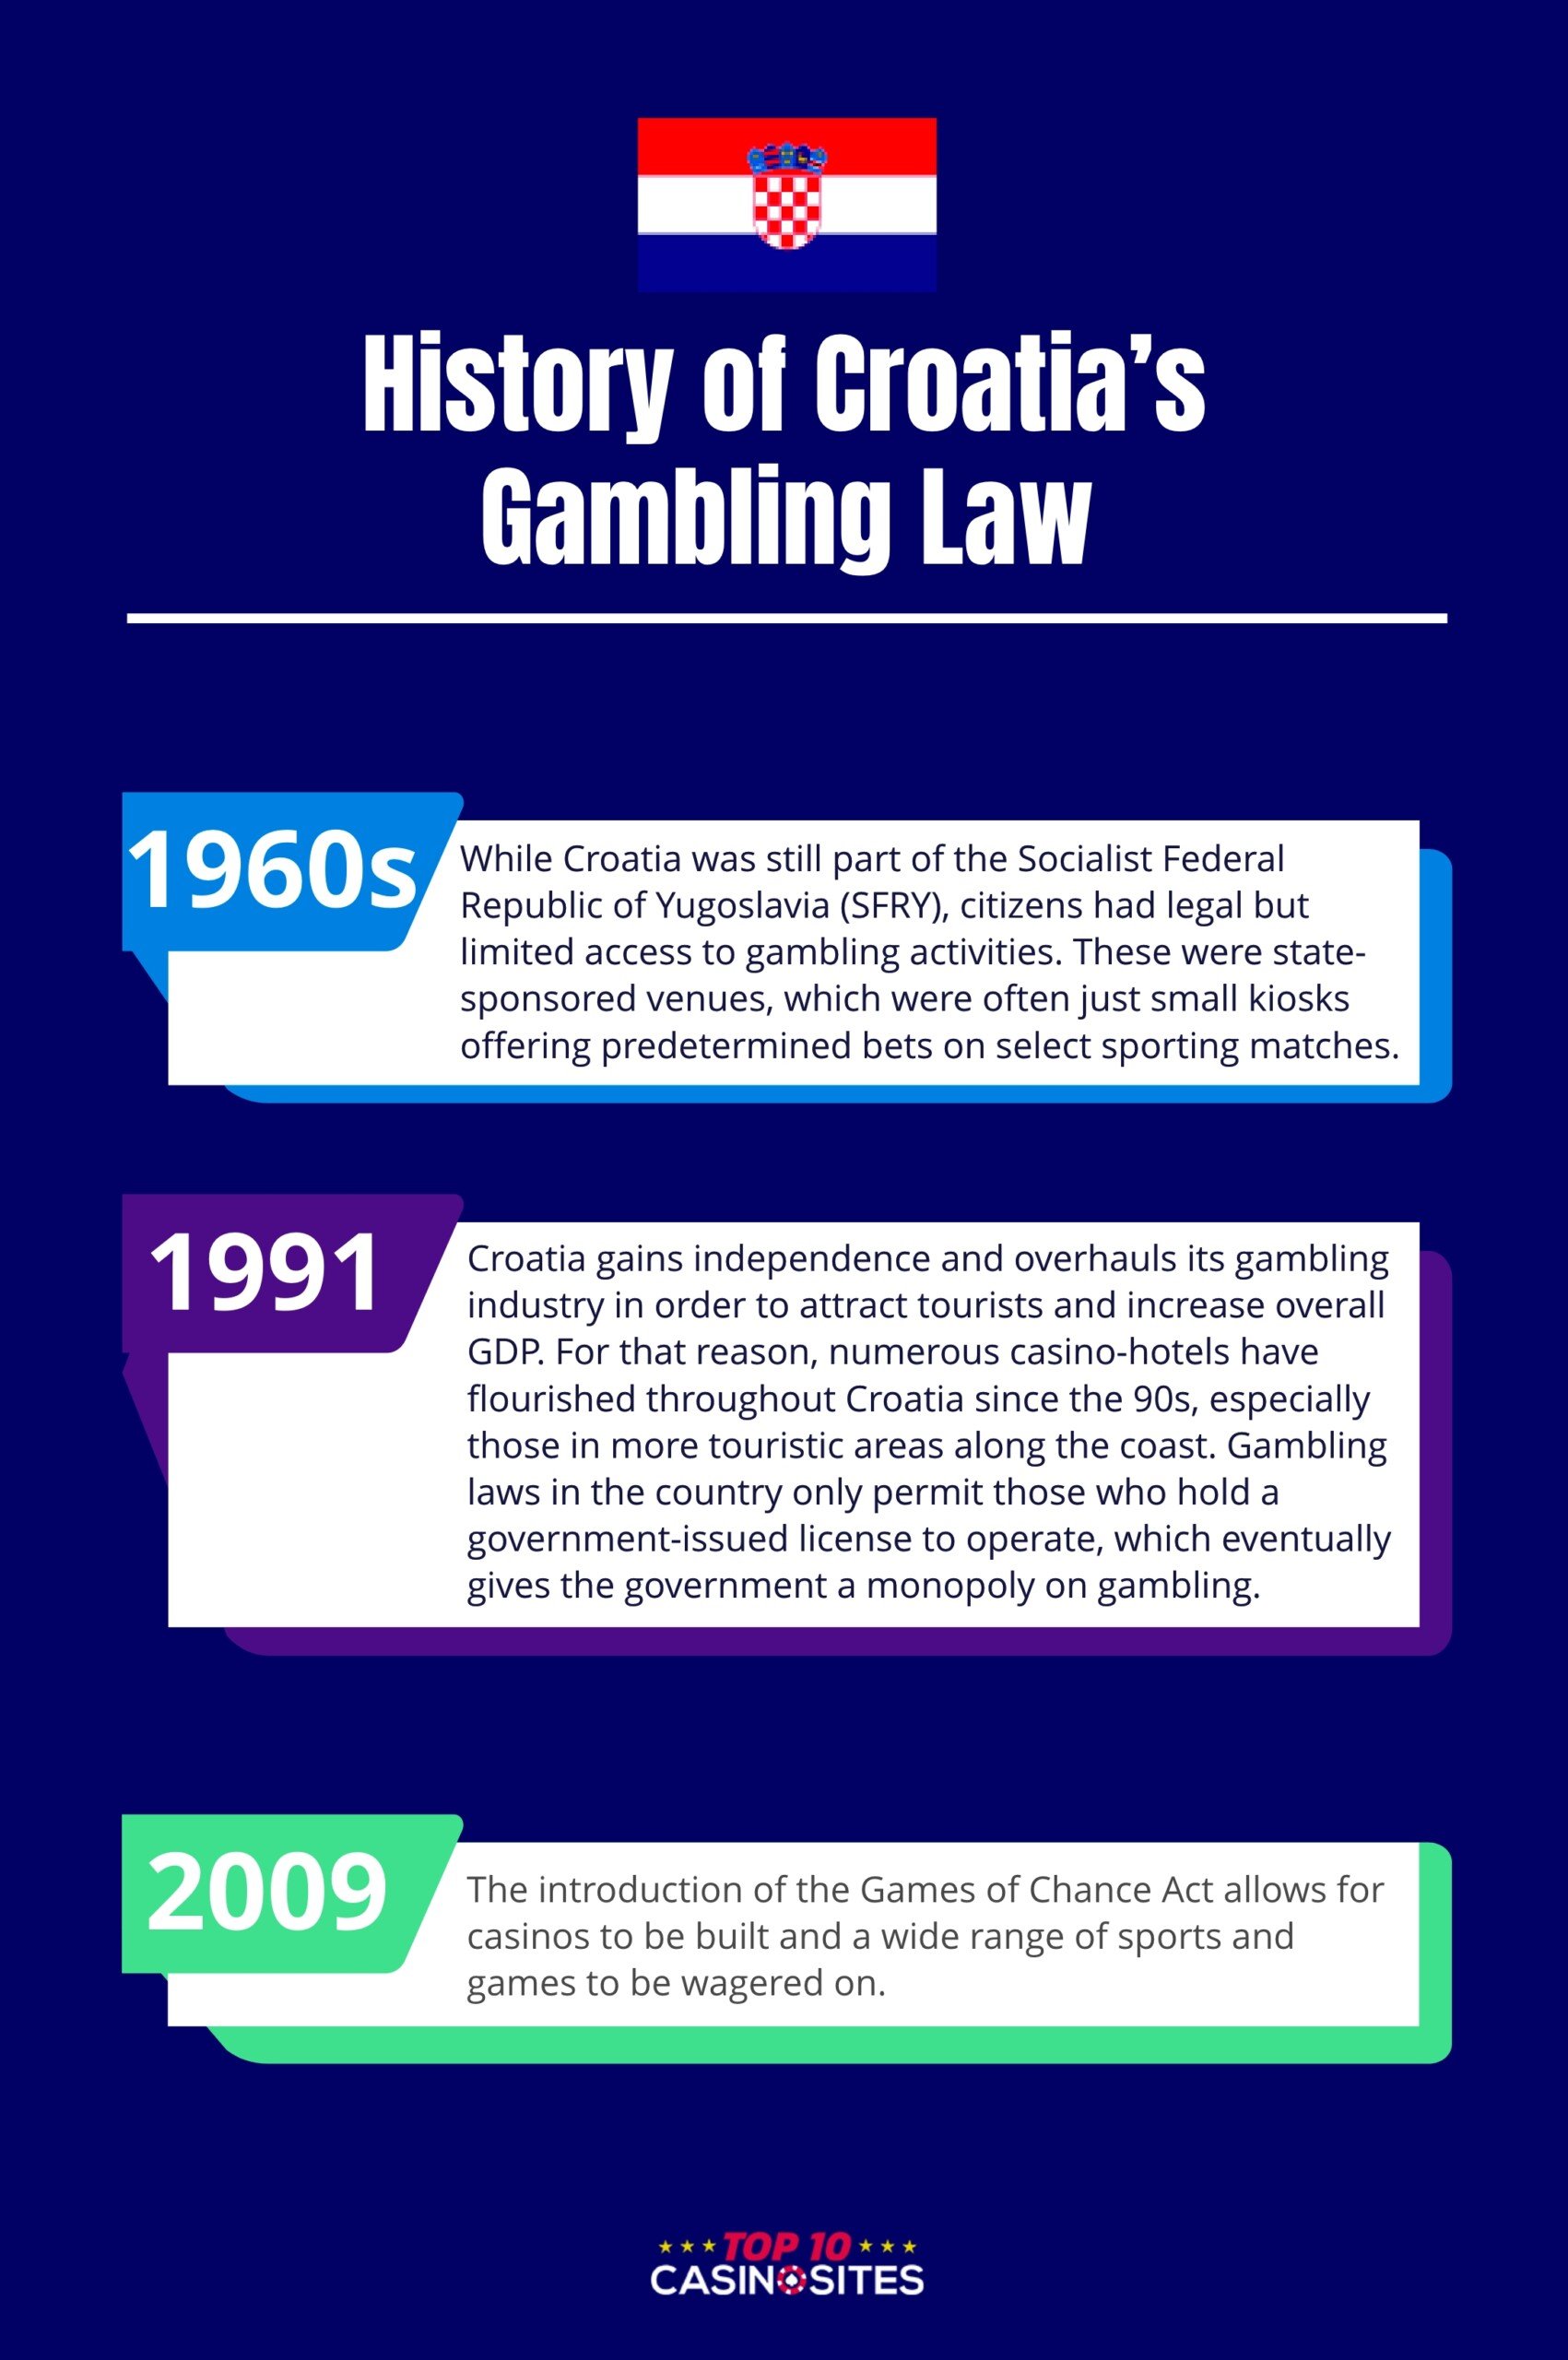 An infographic of the history of Croatia's Gambling Law